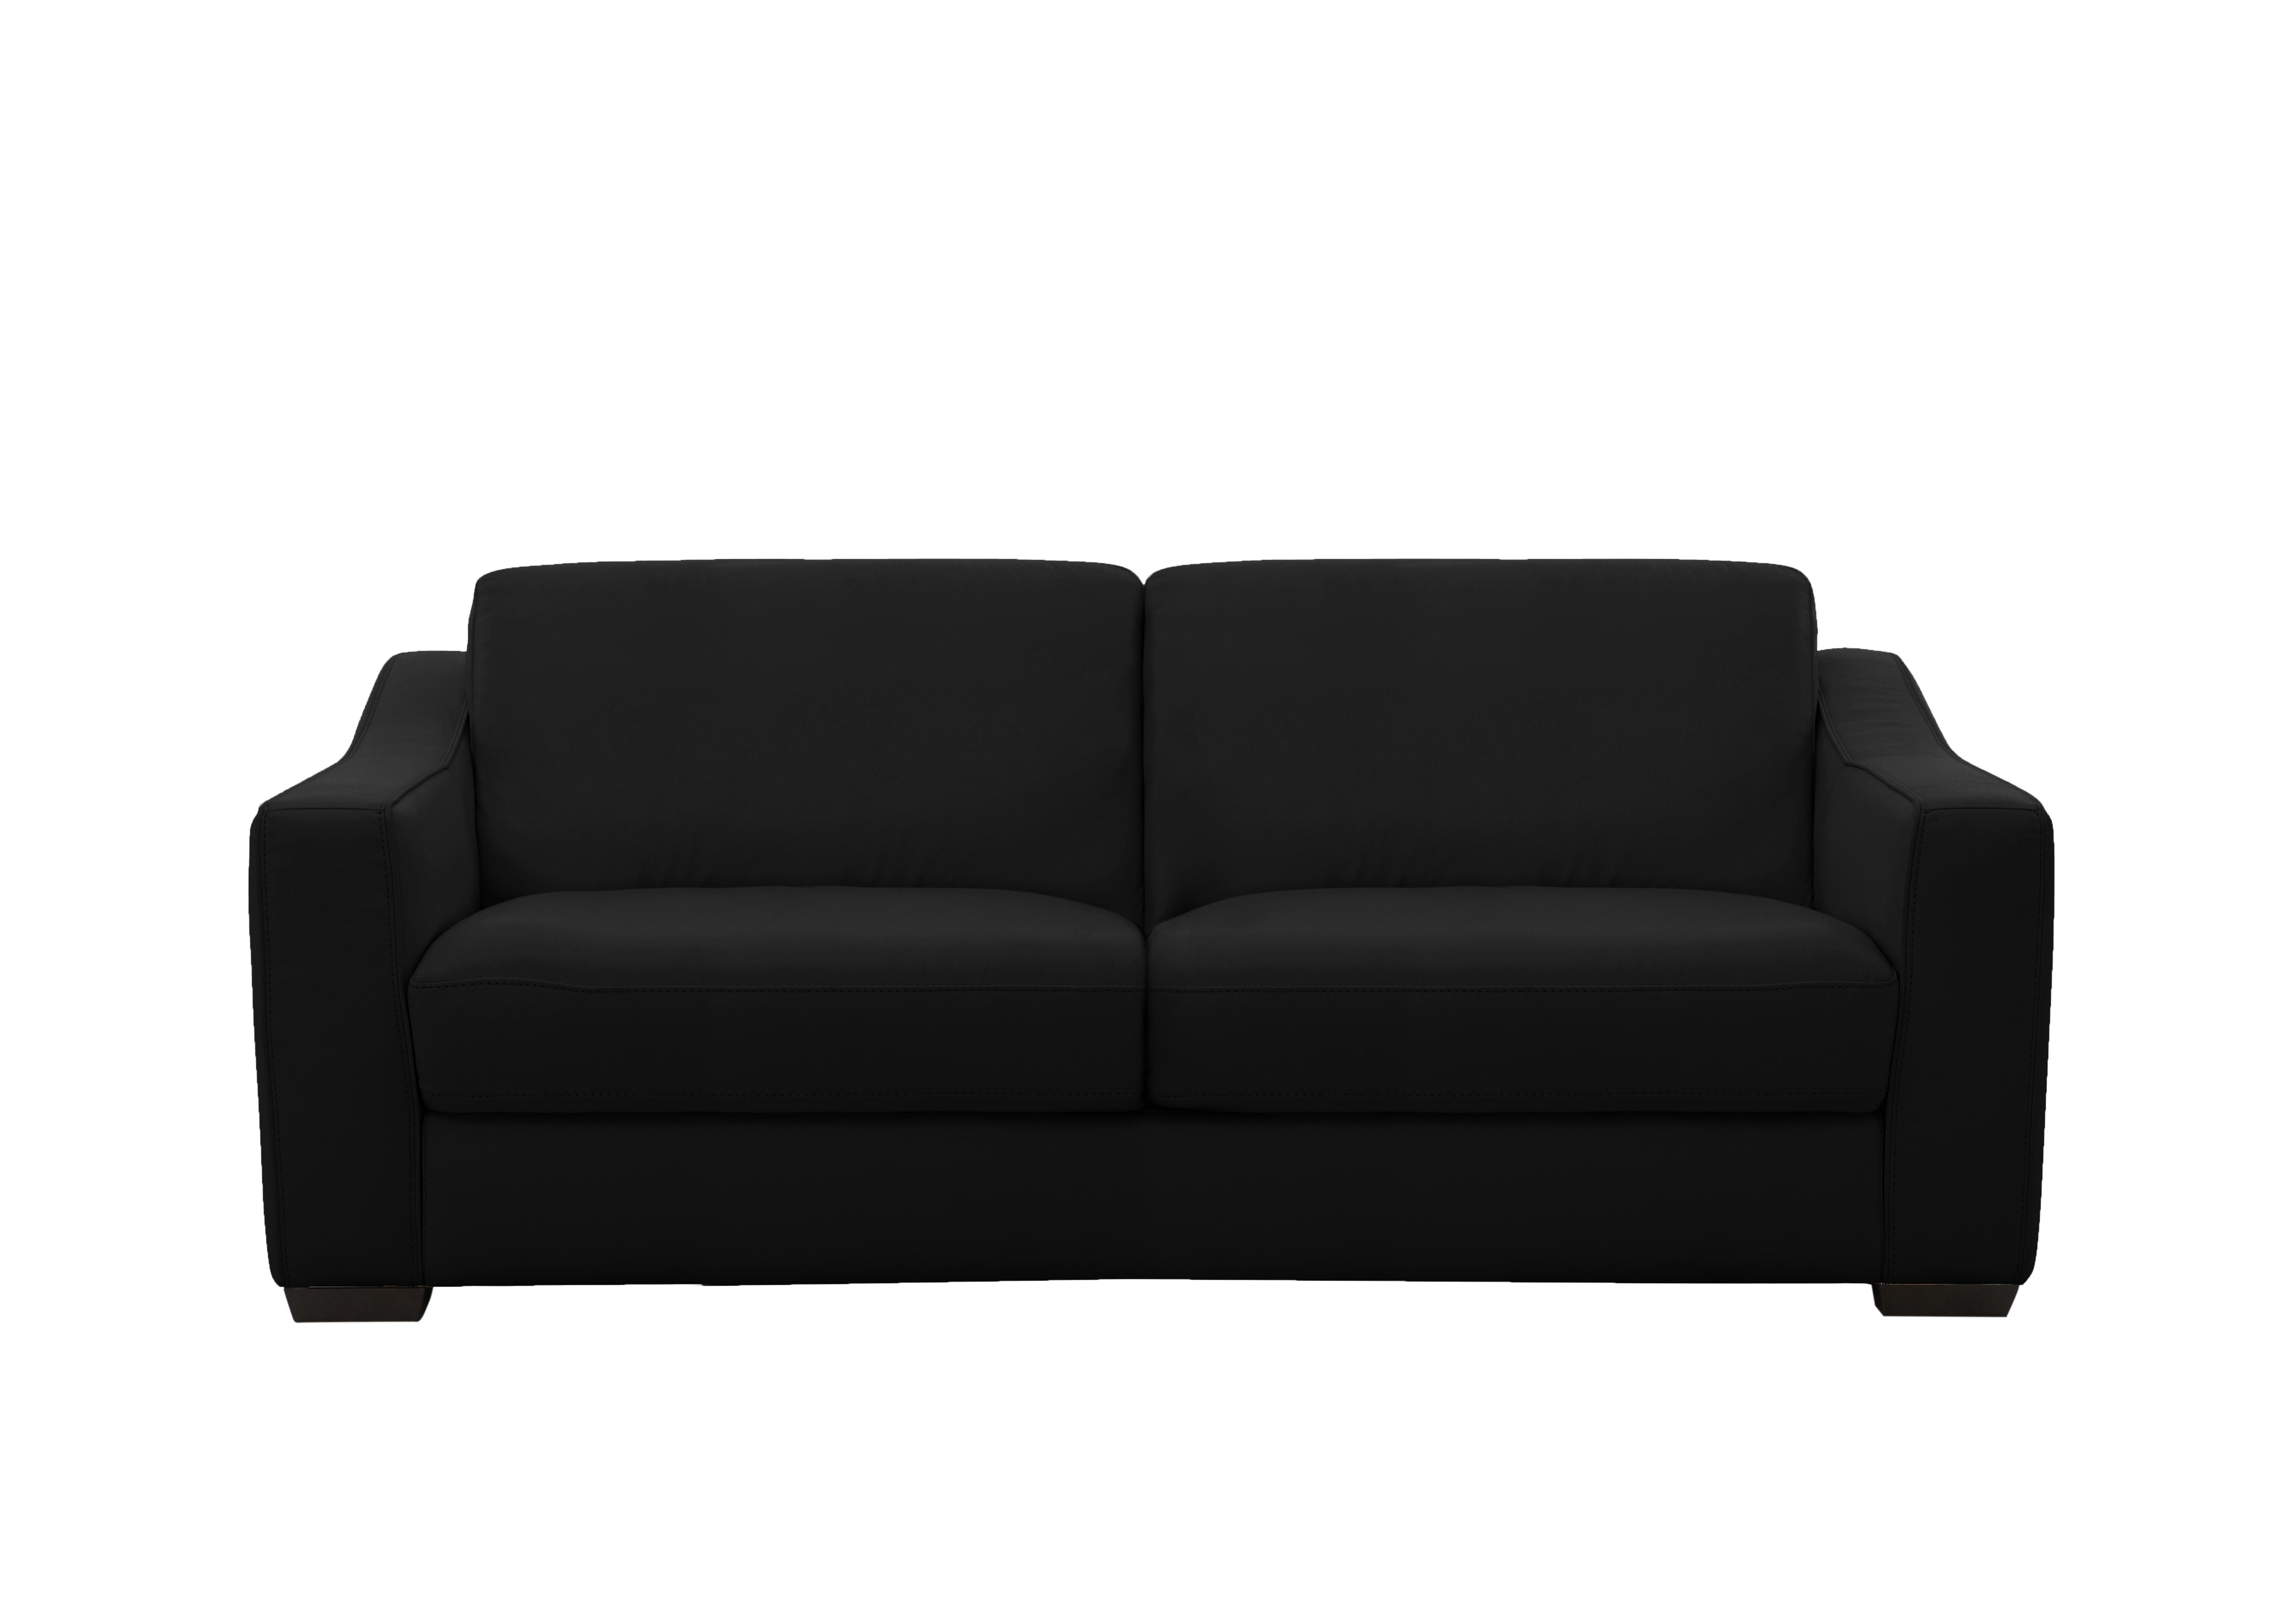 Optimus Space Saving Leather Sofa Bed with Memory Foam Mattress in Bv-3500 Classic Black on Furniture Village